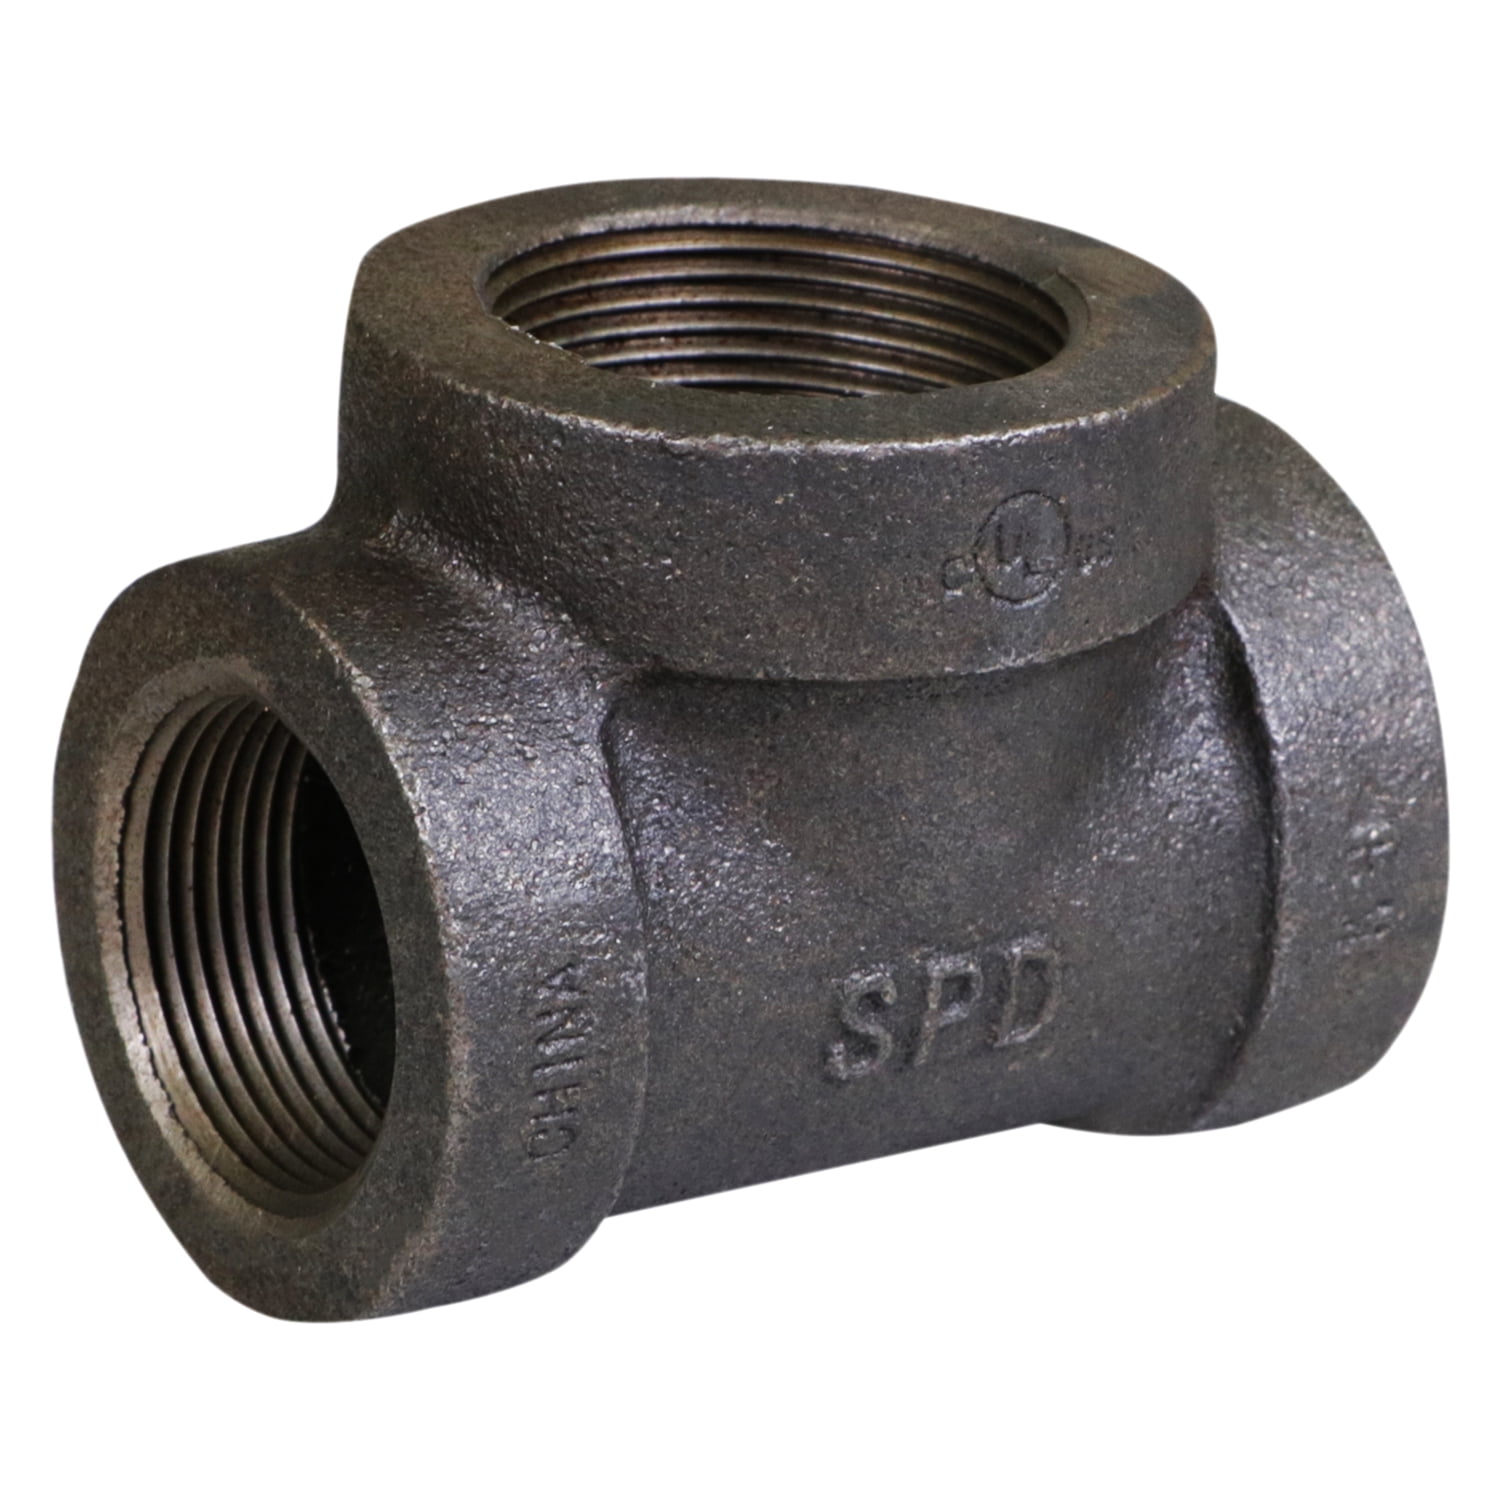 3/4" 1/2" 1" steps Small Universal Tee Will Join Up to 3 Pipes Pond Fitting 